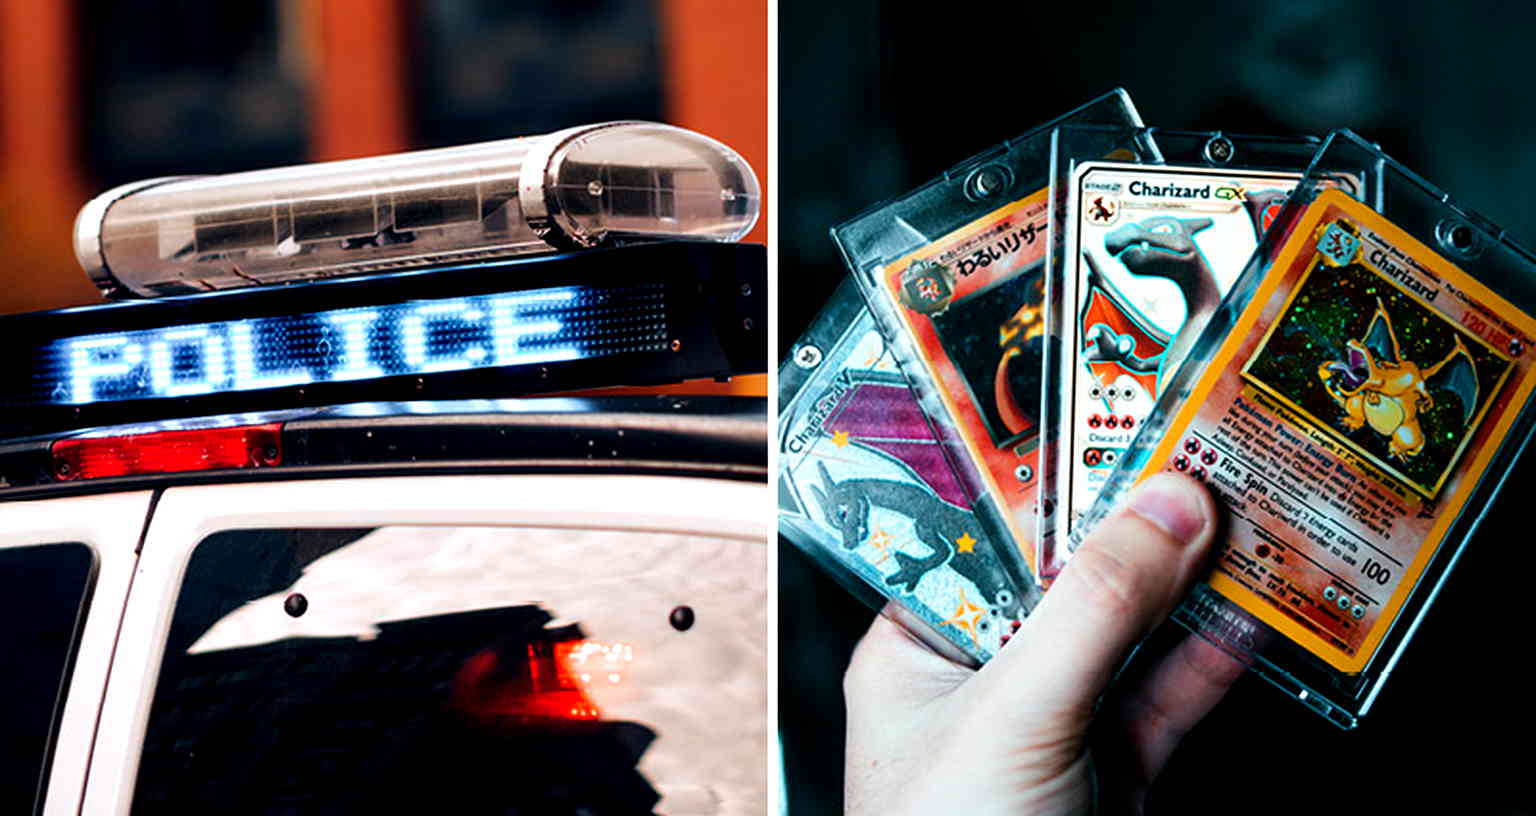 Man killed, 3 others injured by police over stolen Pokémon cards and pizza in Florida